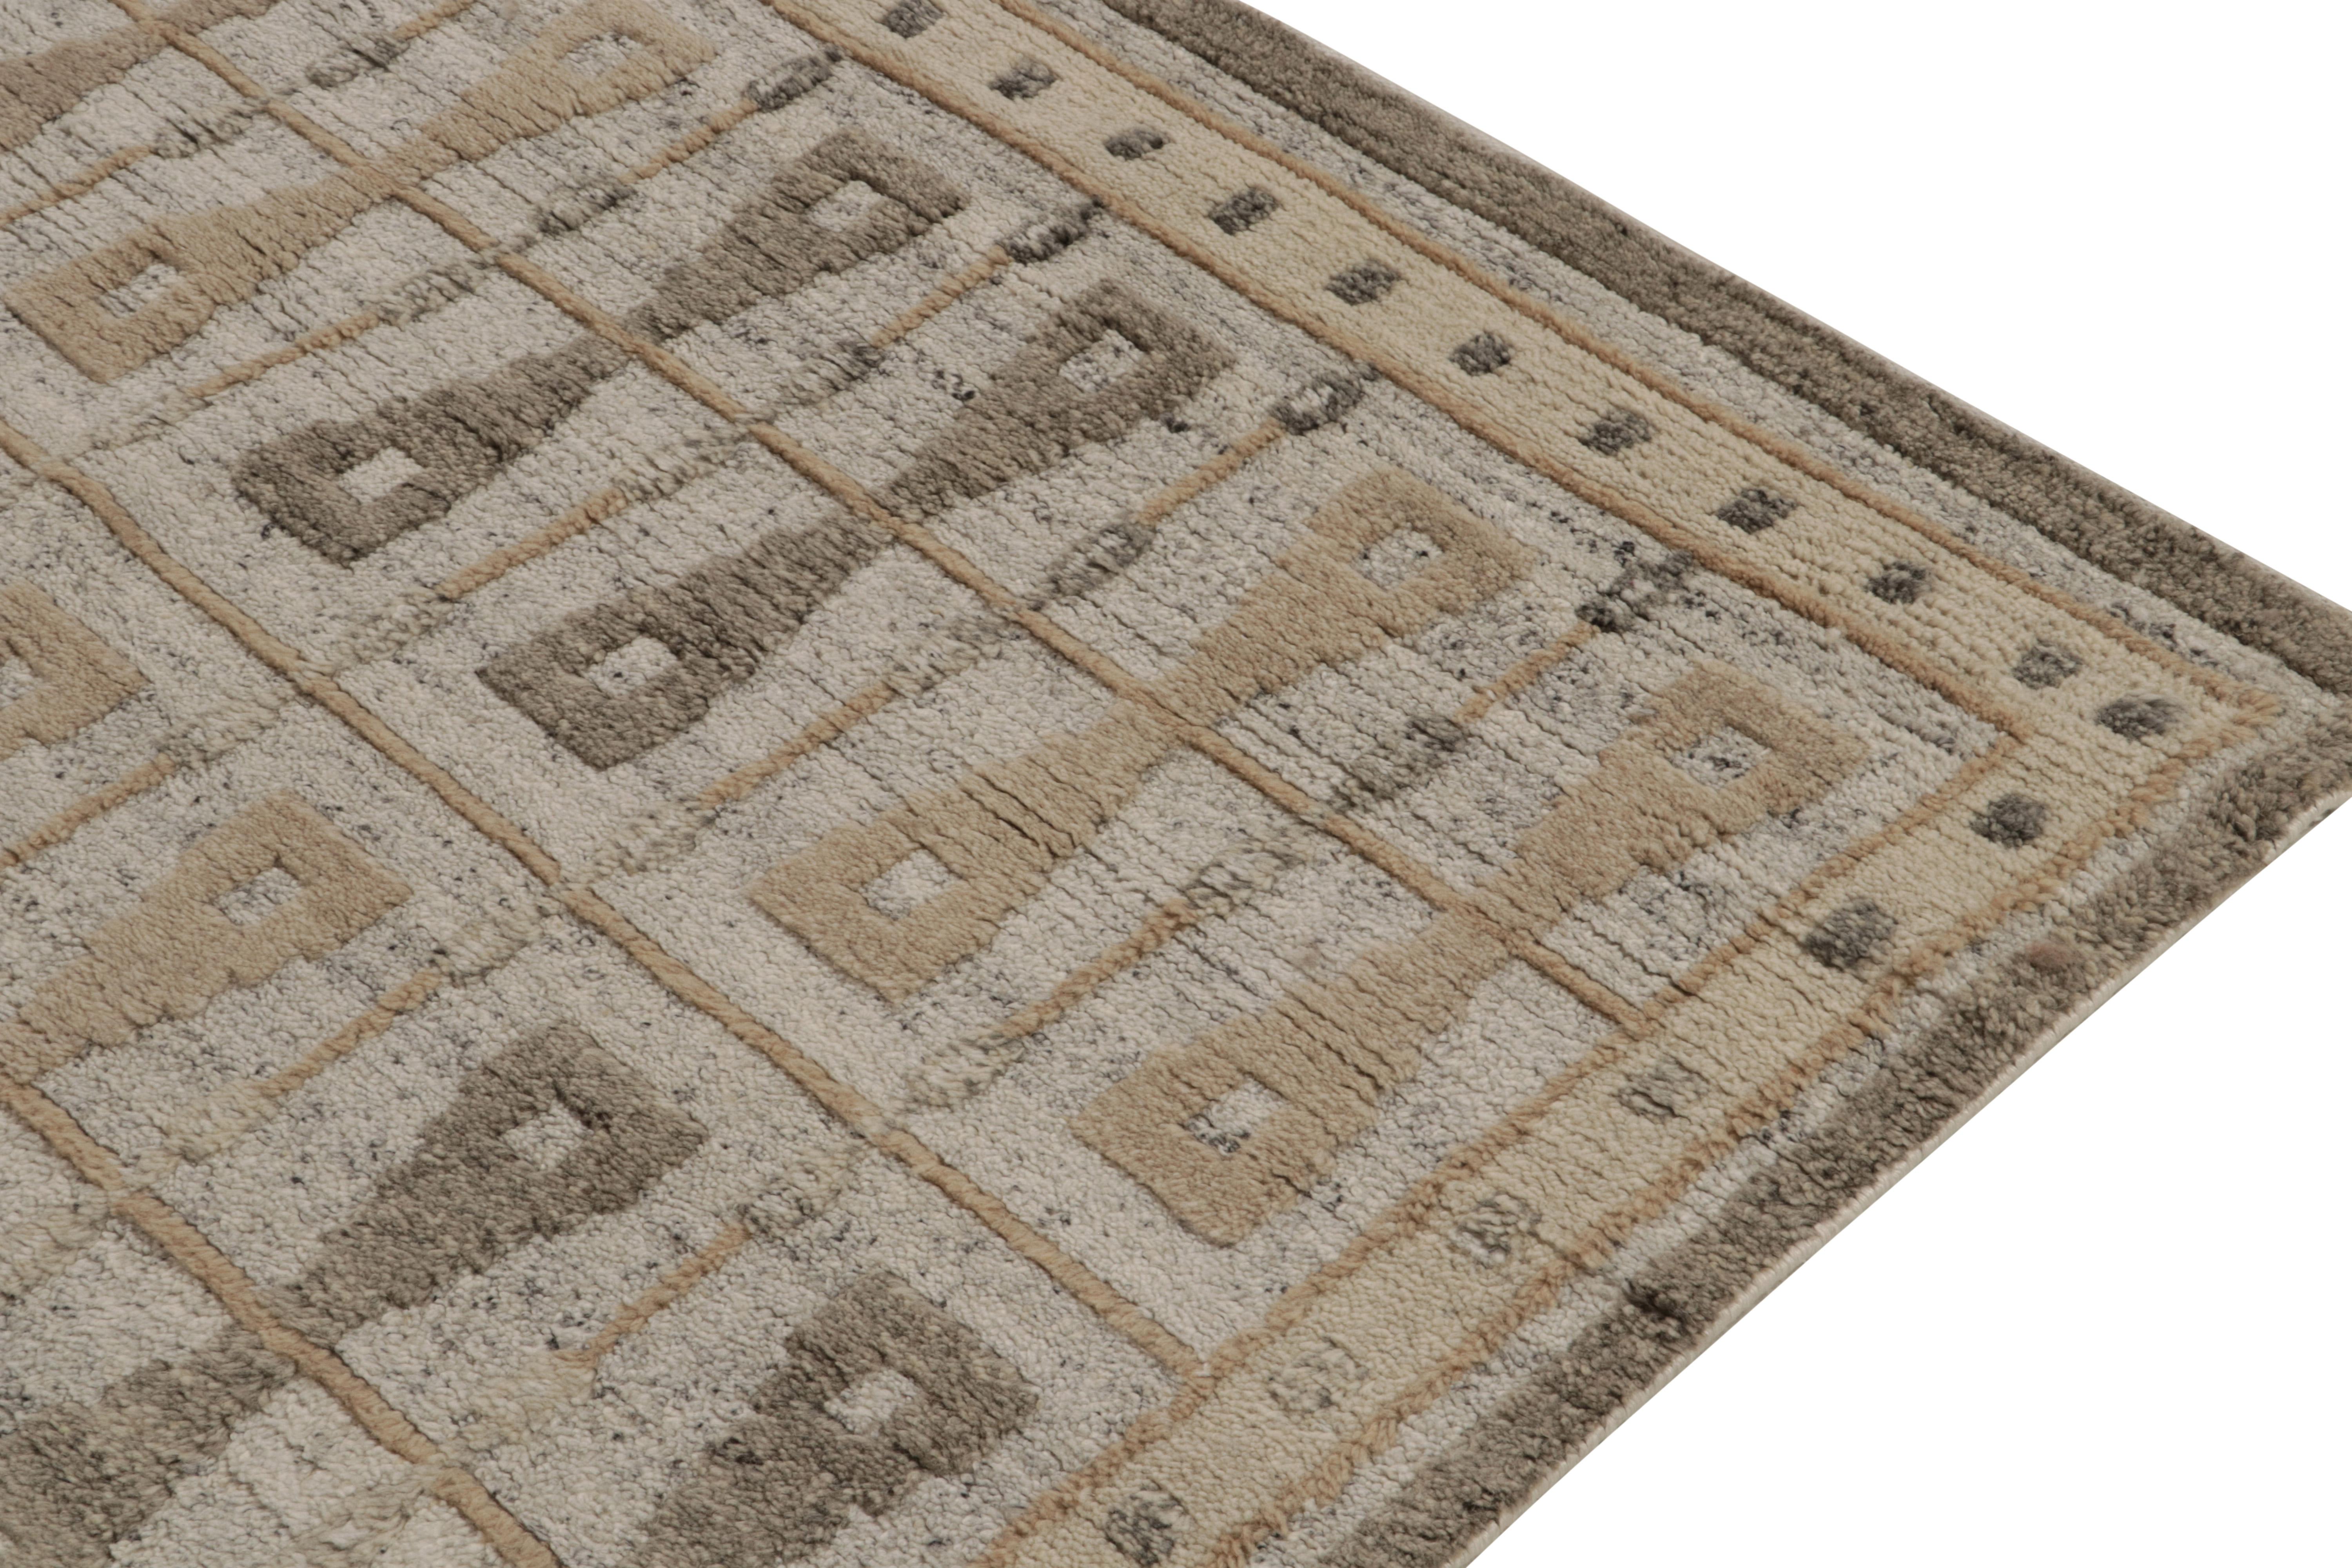 Hand-Knotted Rug & Kilim’s Scandinavian style rug in Beige-Brown & Grey Geometric Patterns For Sale